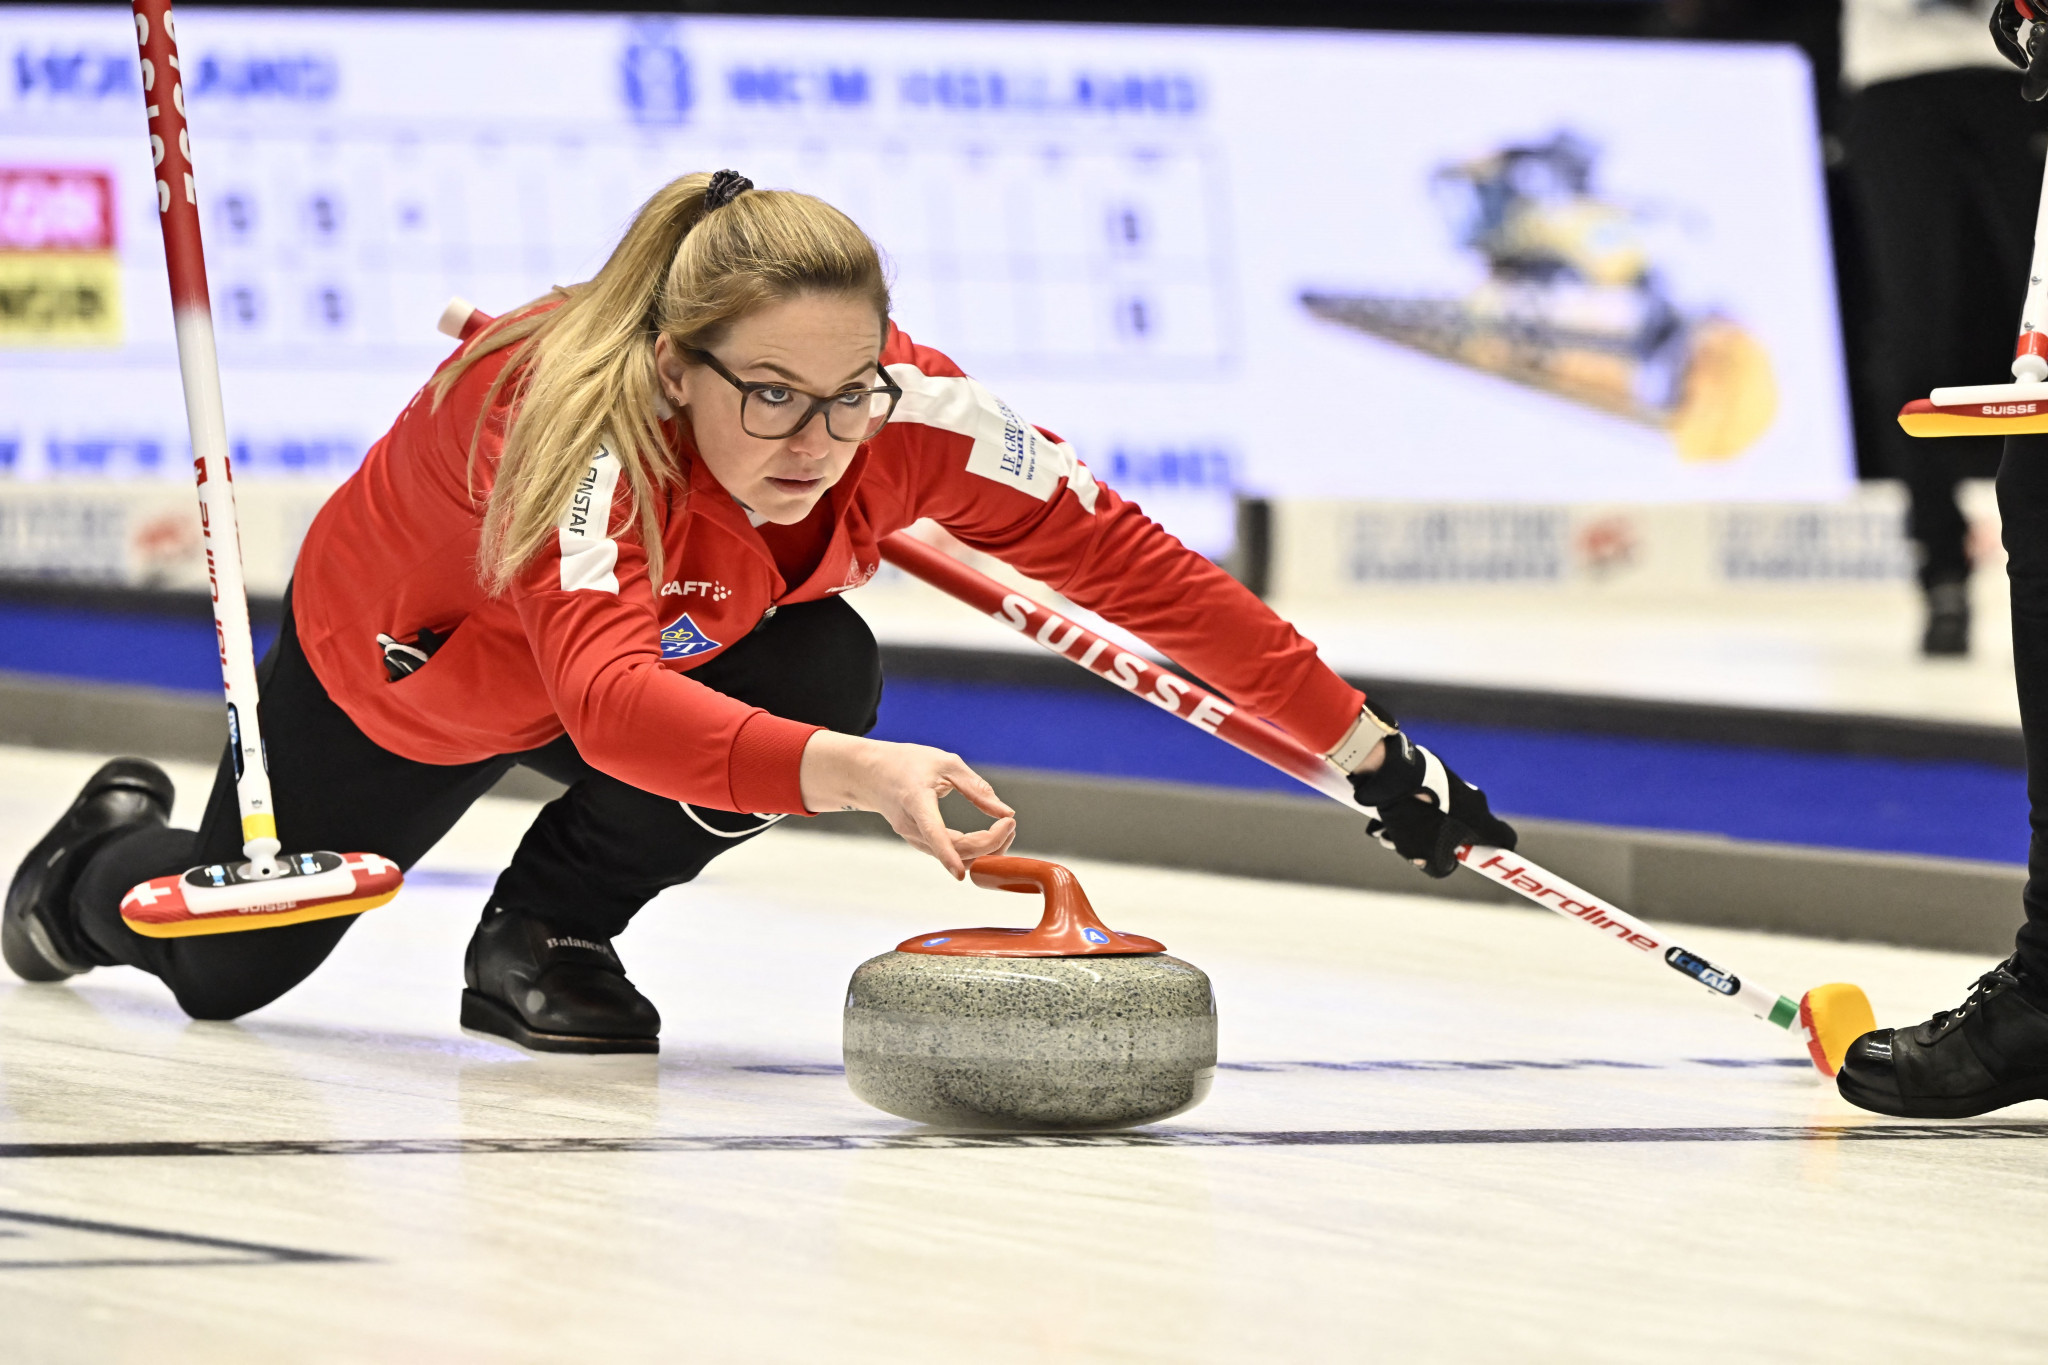 Switzerland registered two more wins on the second day of action at the World Women's Curling Championship ©Getty Images